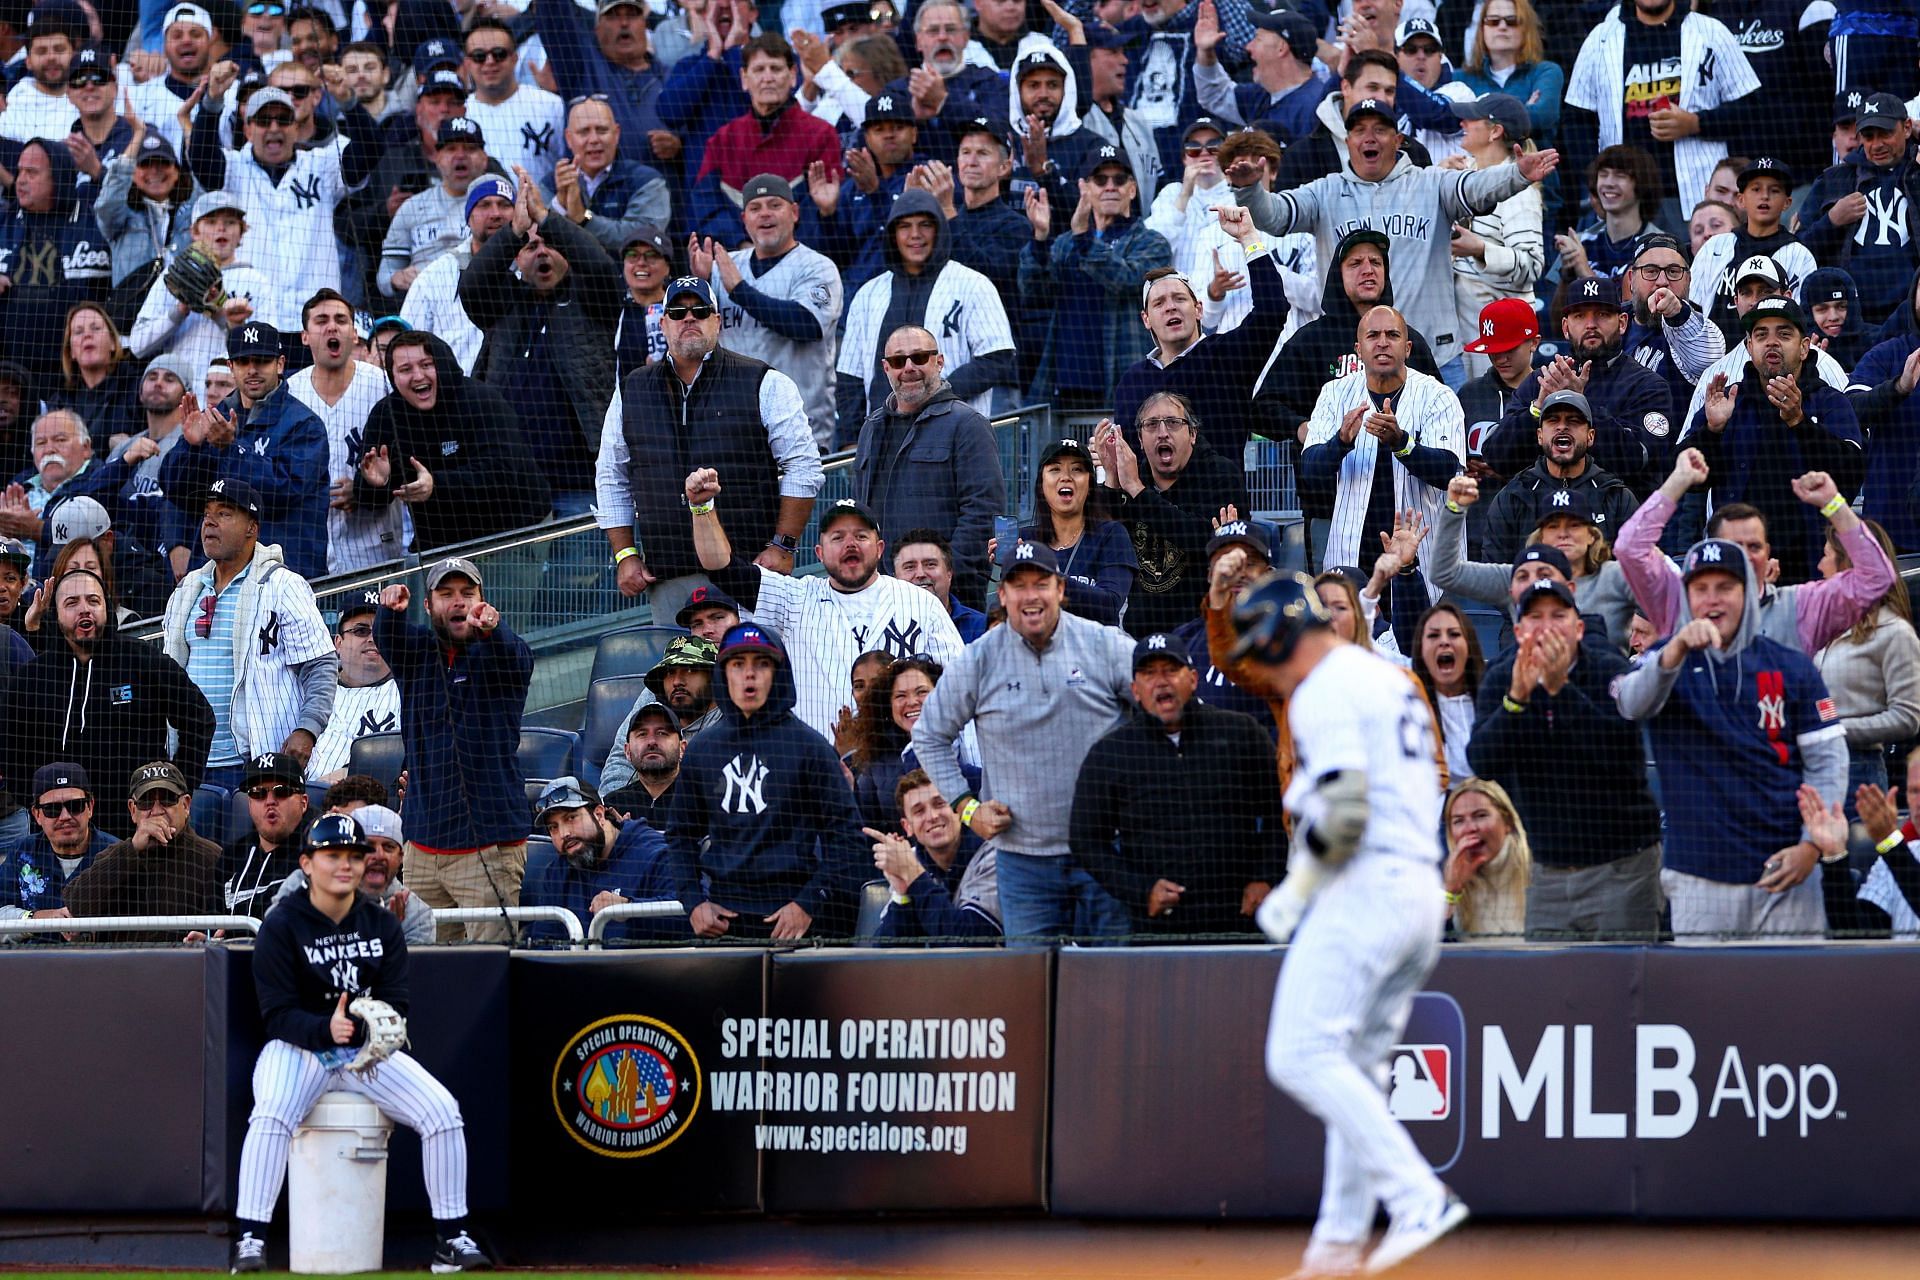 Some Yankees fans are suffering from sports depression